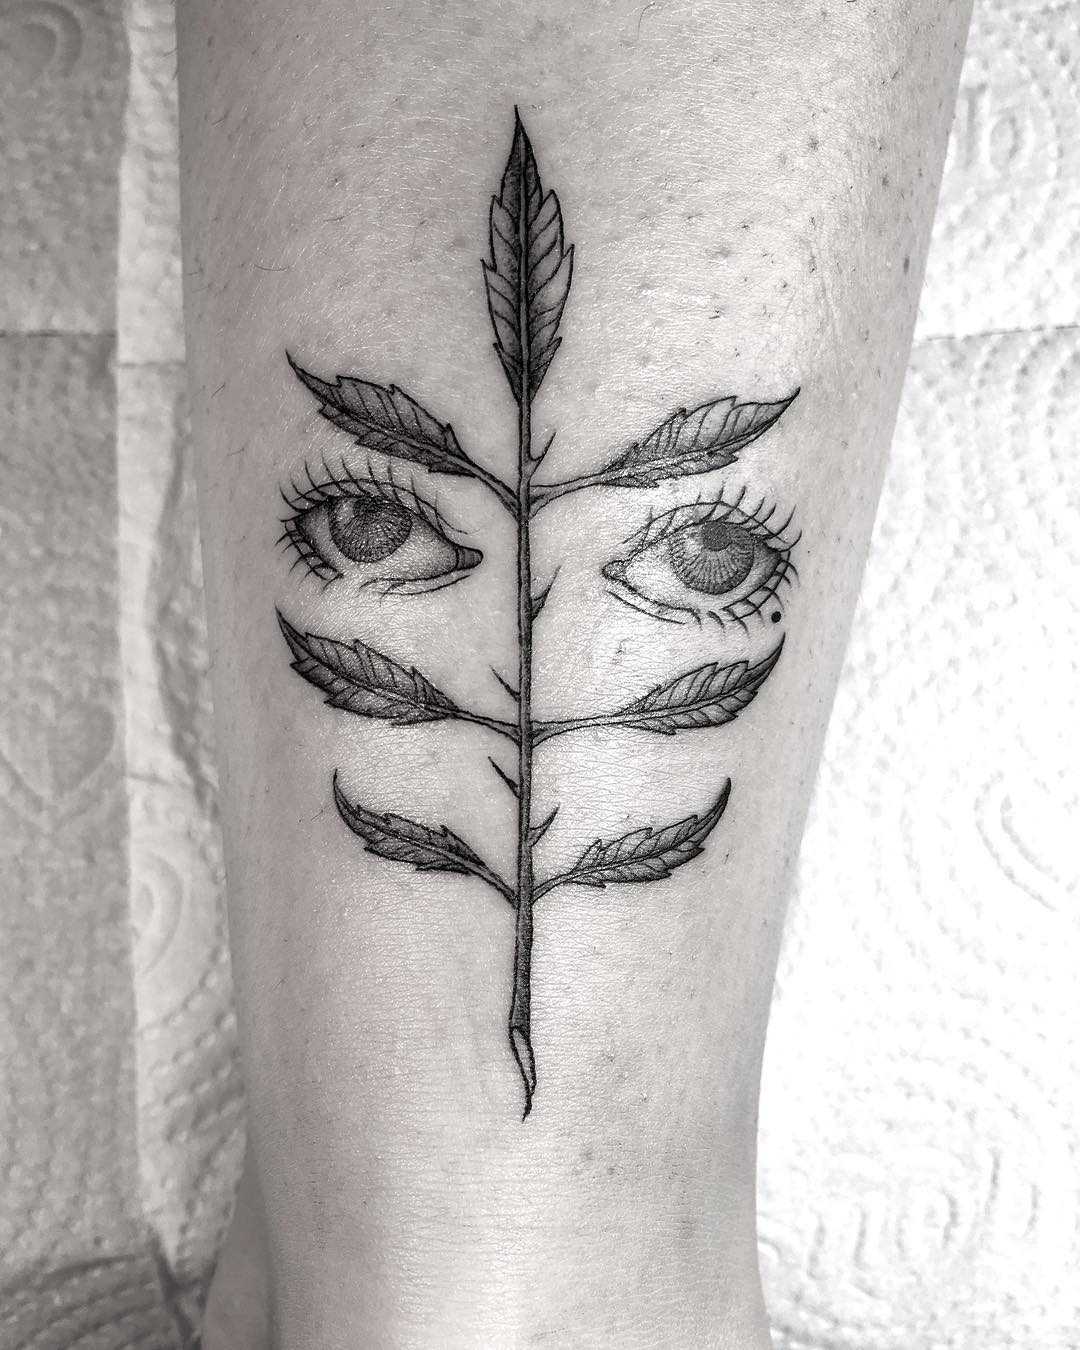 Chicano eyes and branch tattoo